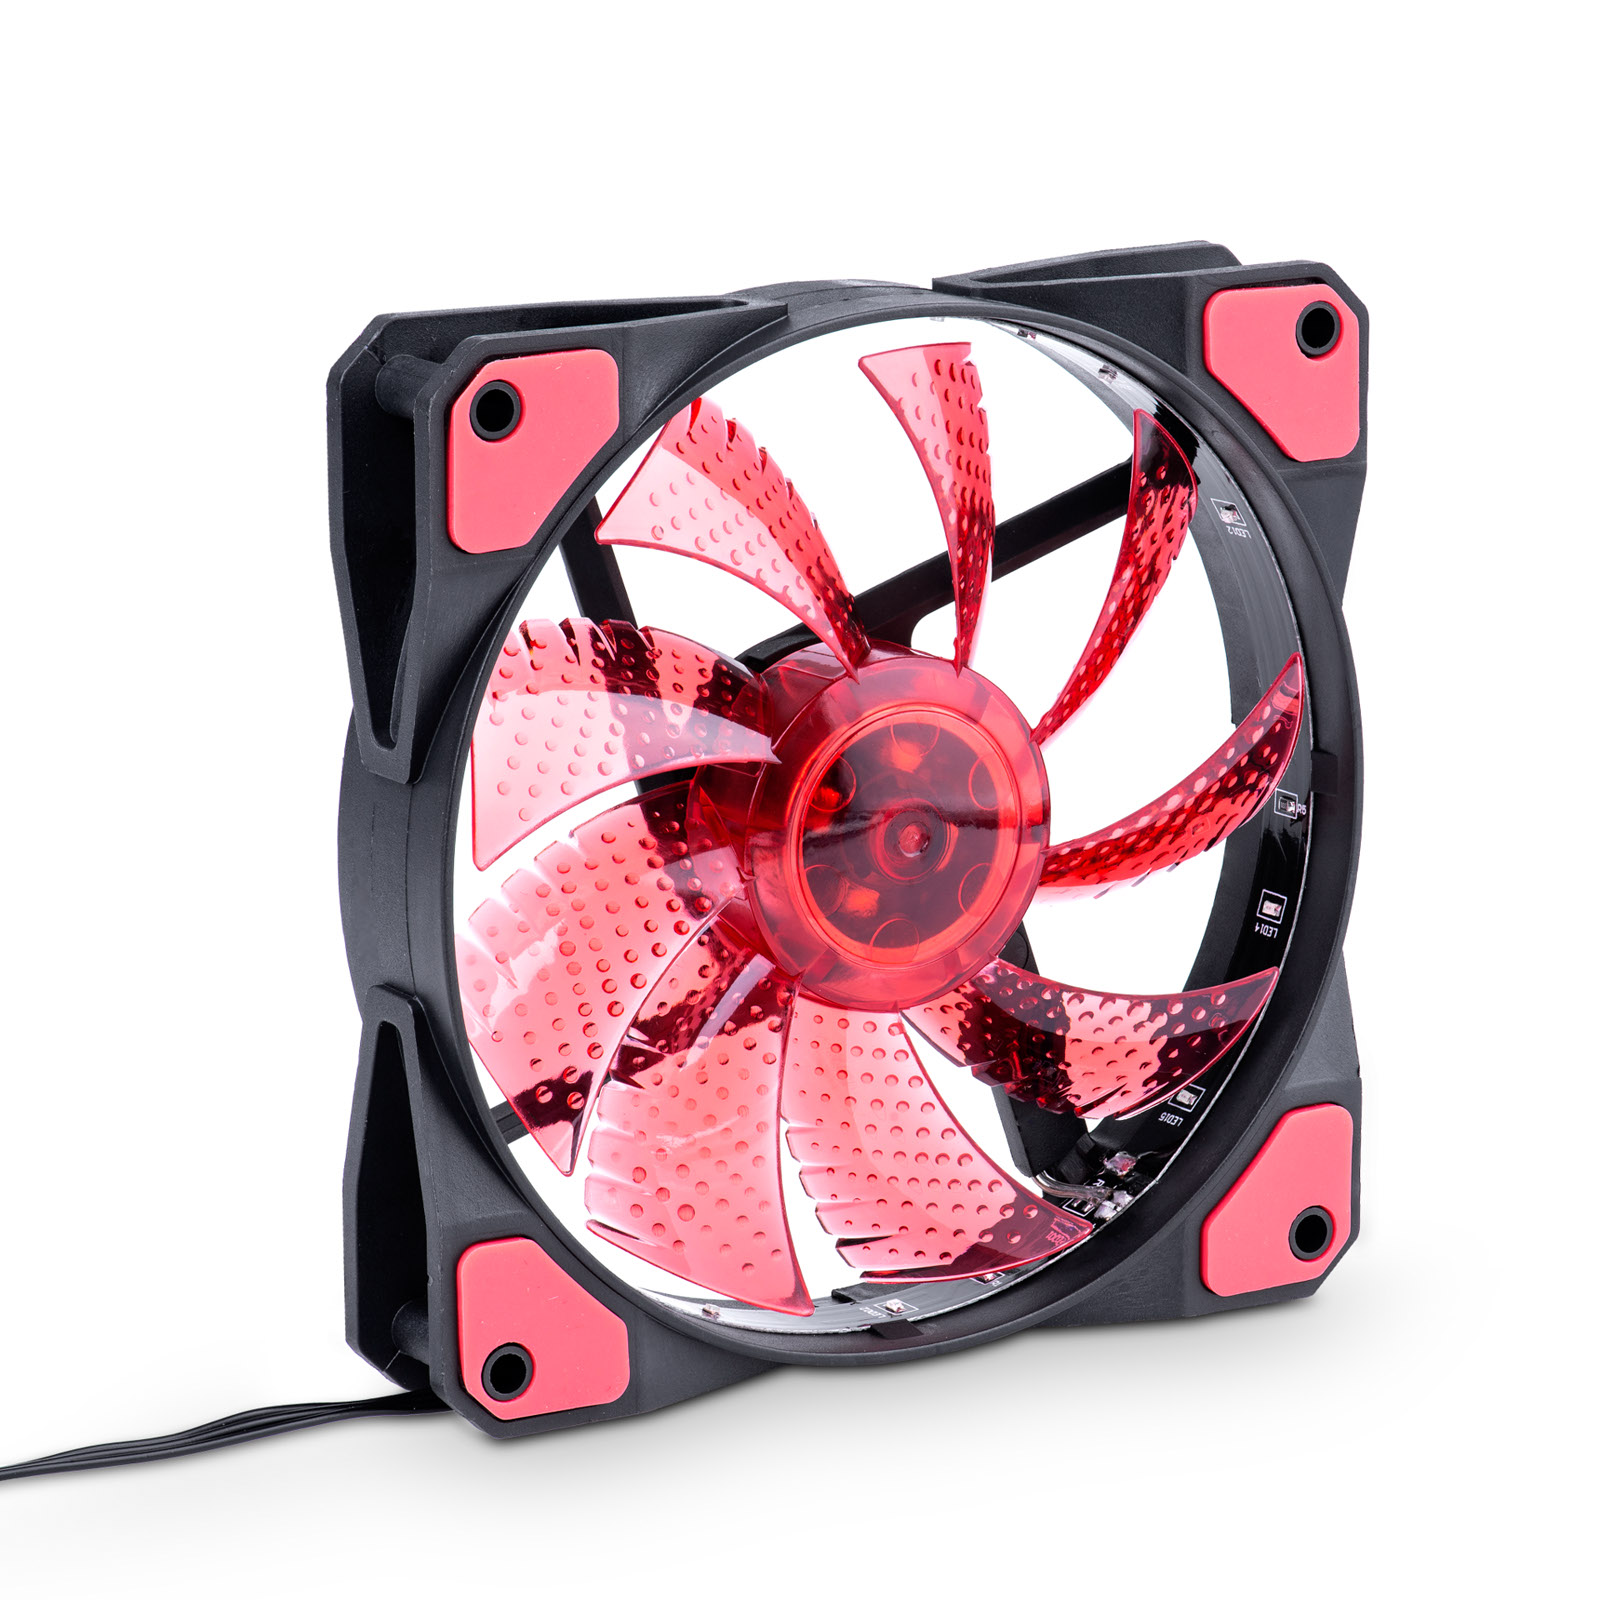 Main image Fan 120mm MOLEX / 3-pin 15 LED red AW-12C-BR